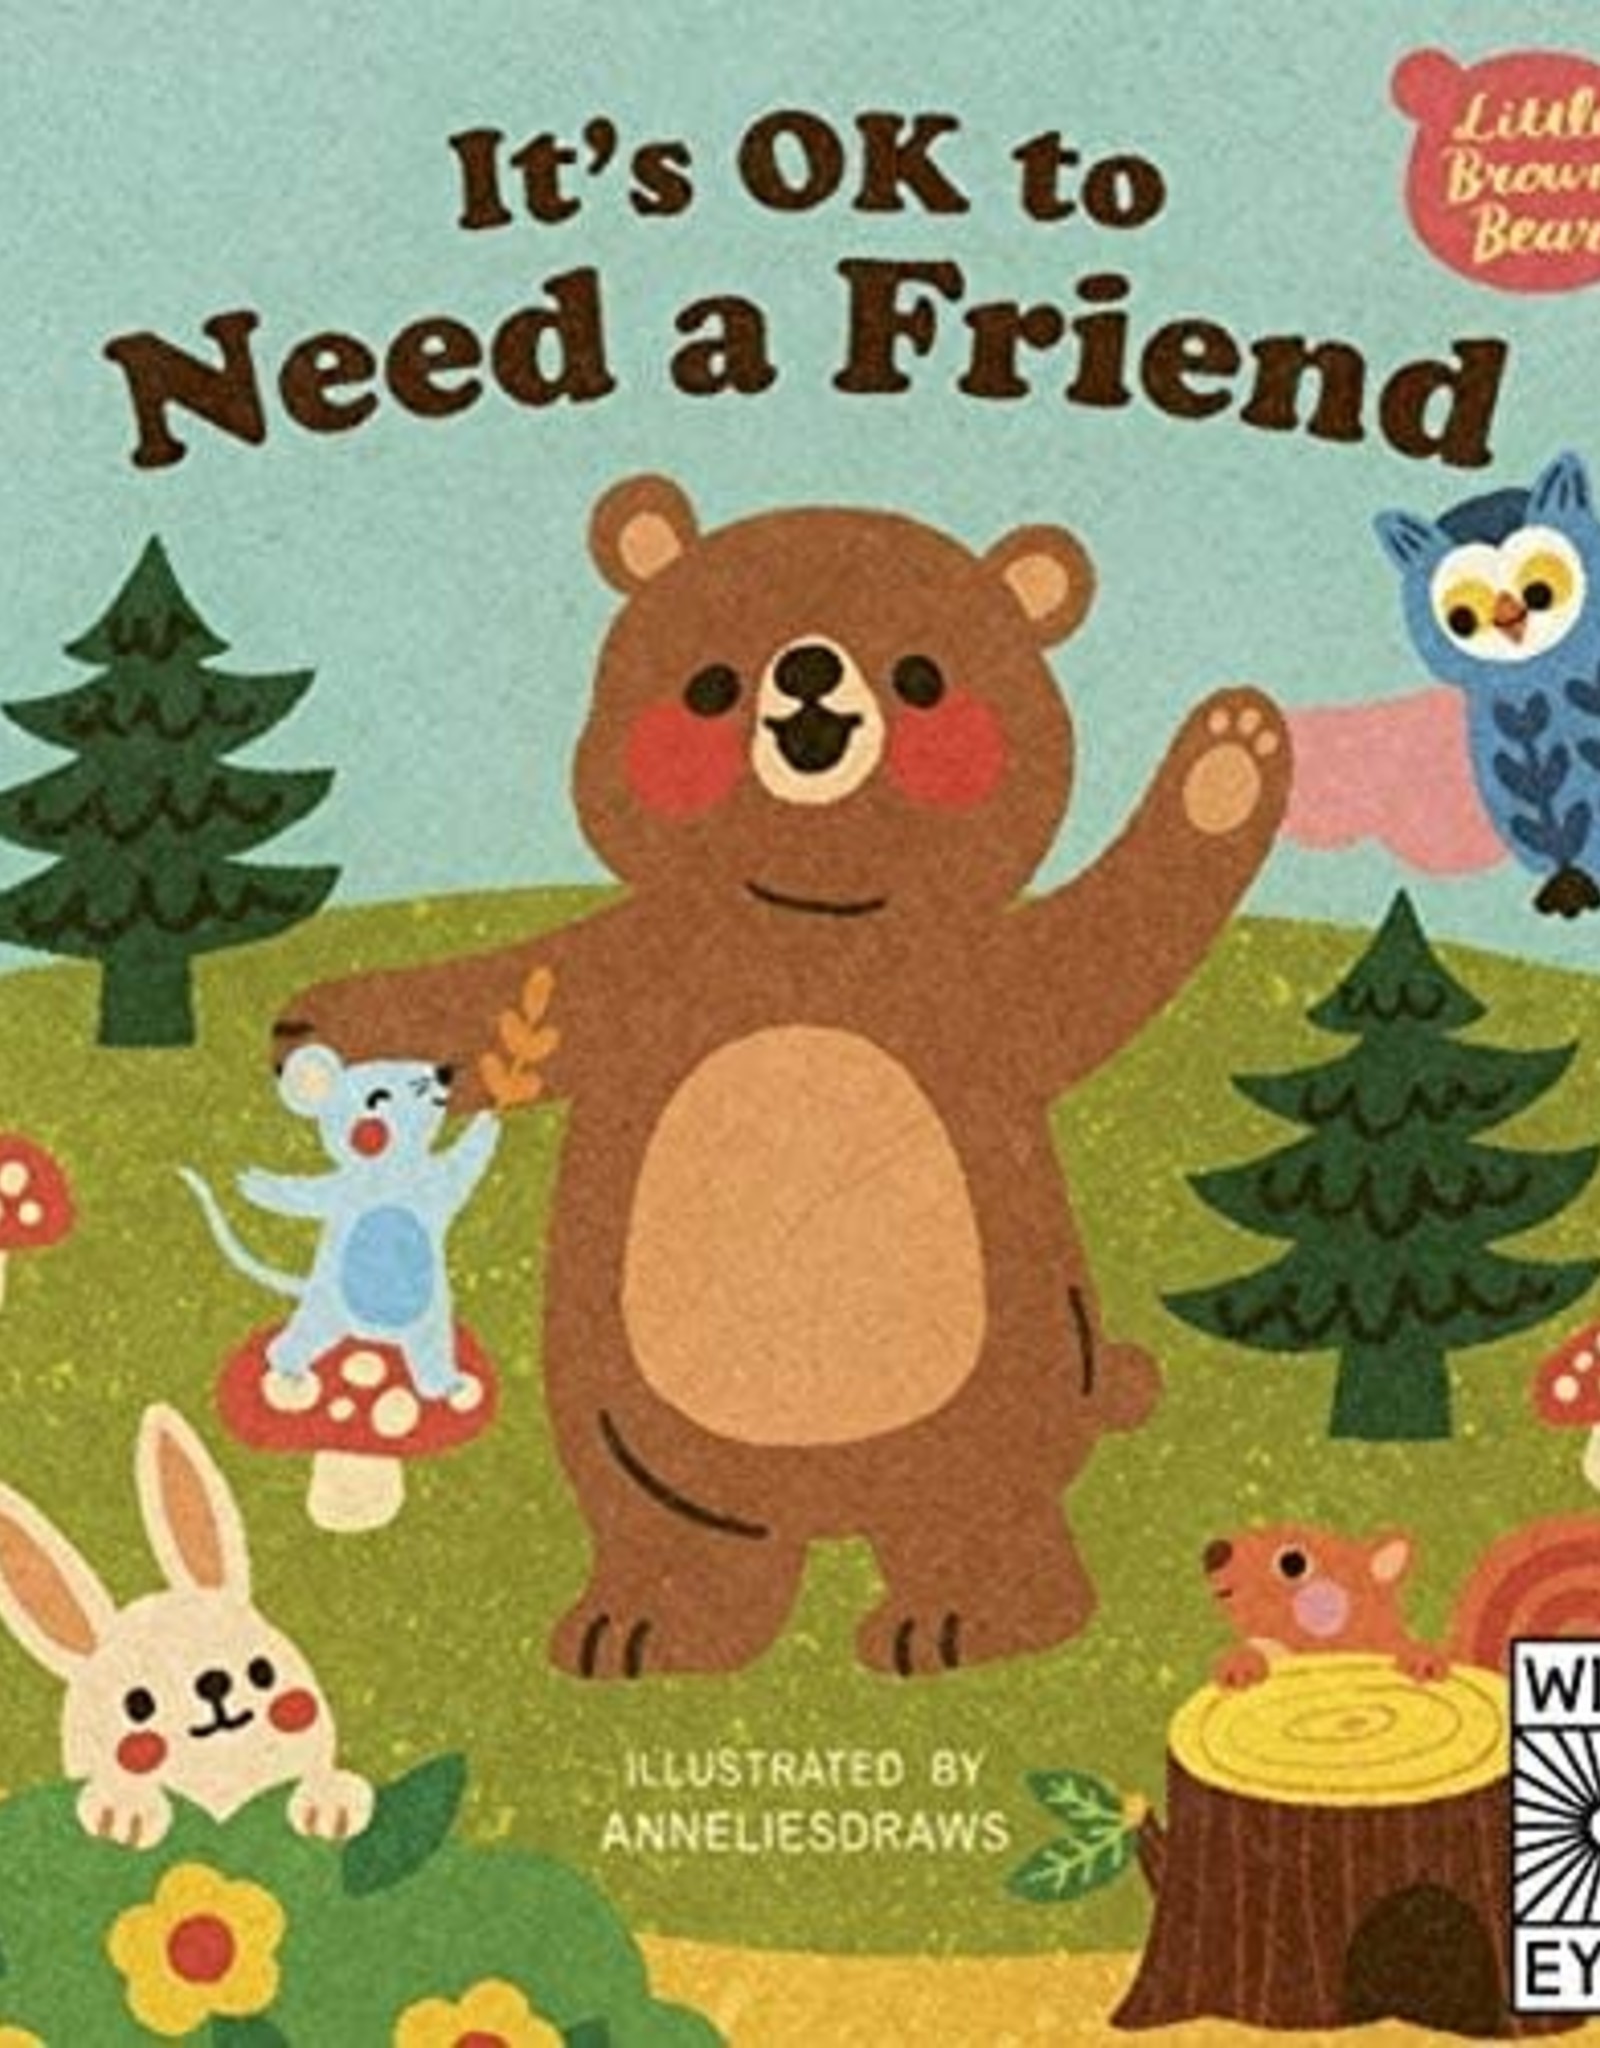 BOOK PUBLISHERS IT'S OK TO NEED A FRIEND